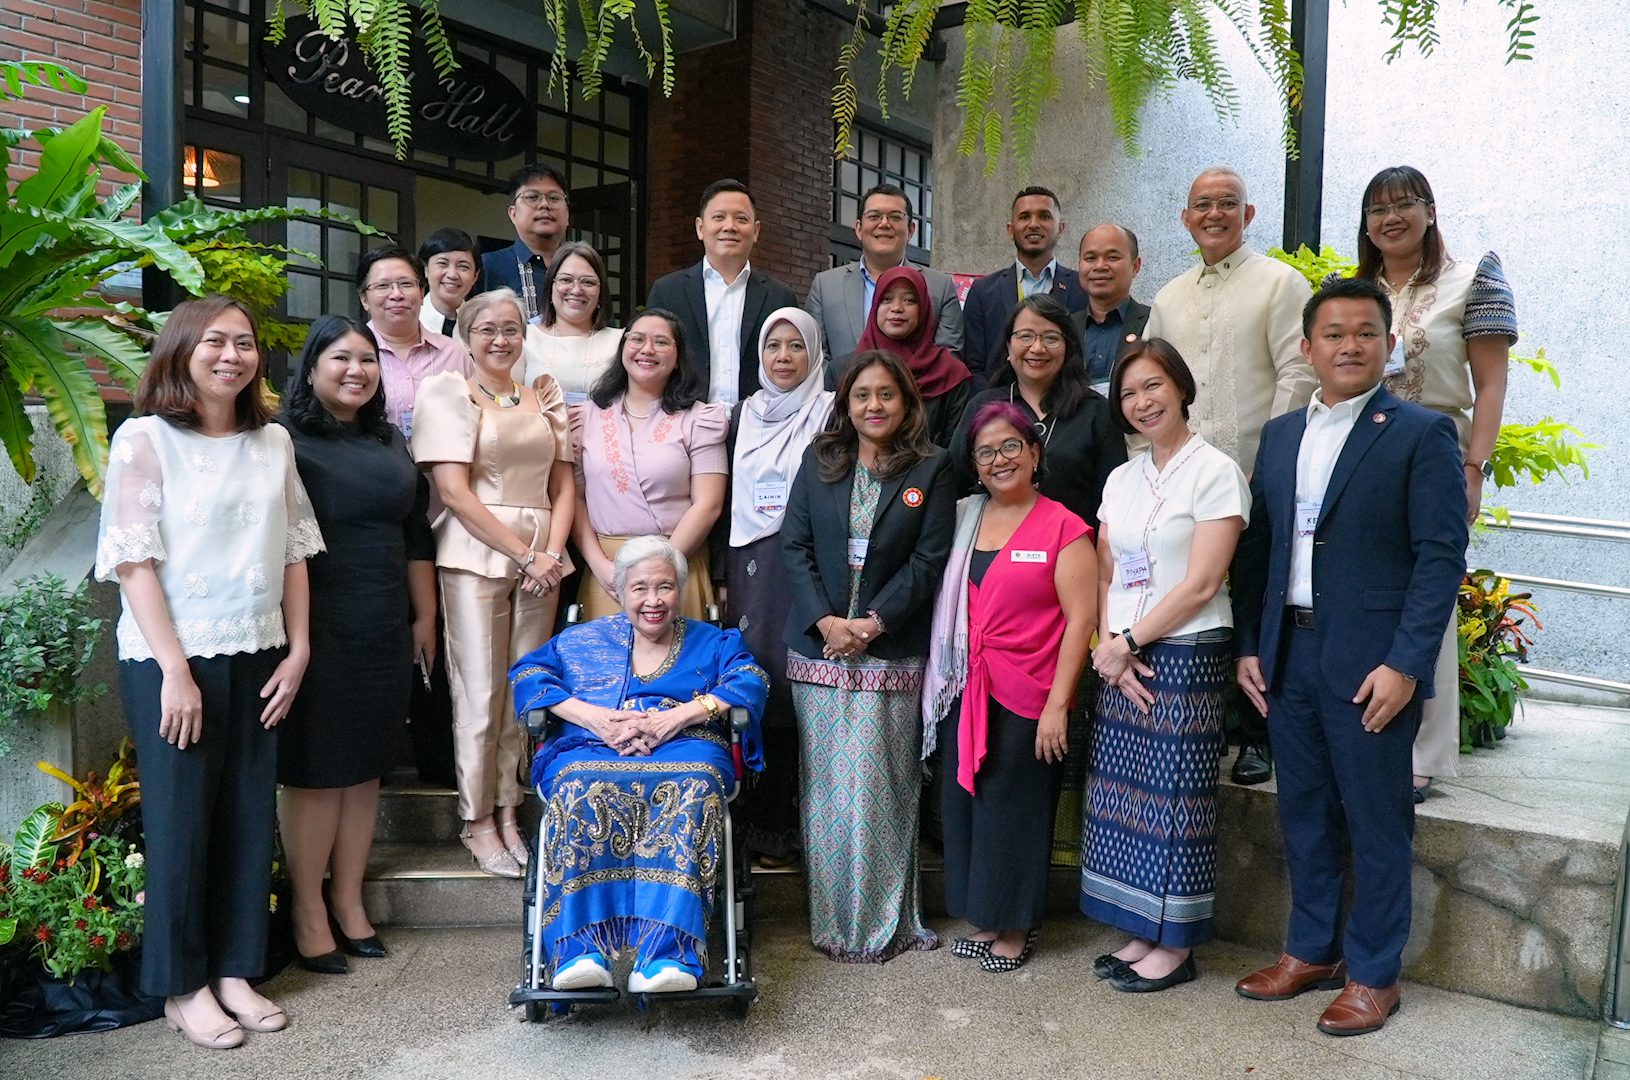 Southeast Asian country representatives and content experts take a photo with SEAMEO INNOTECH Center Director, Prof. Leonor Magtolis Briones and the rest of the INNOTECH team.